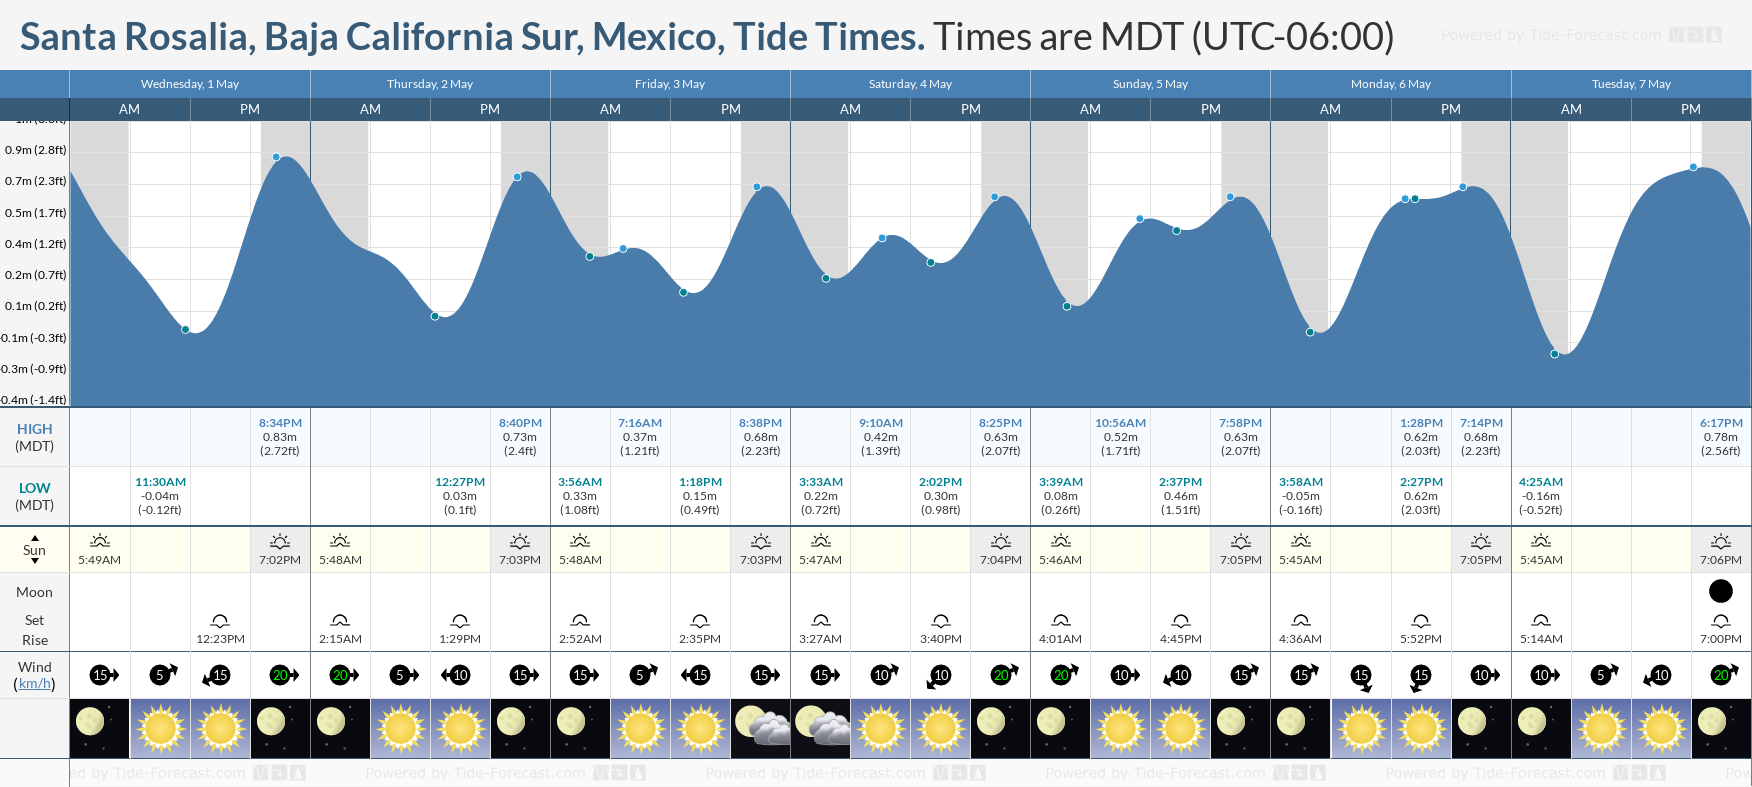 Santa Rosalia, Baja California Sur, Mexico Tide Chart including high and low tide tide times for the next 7 days